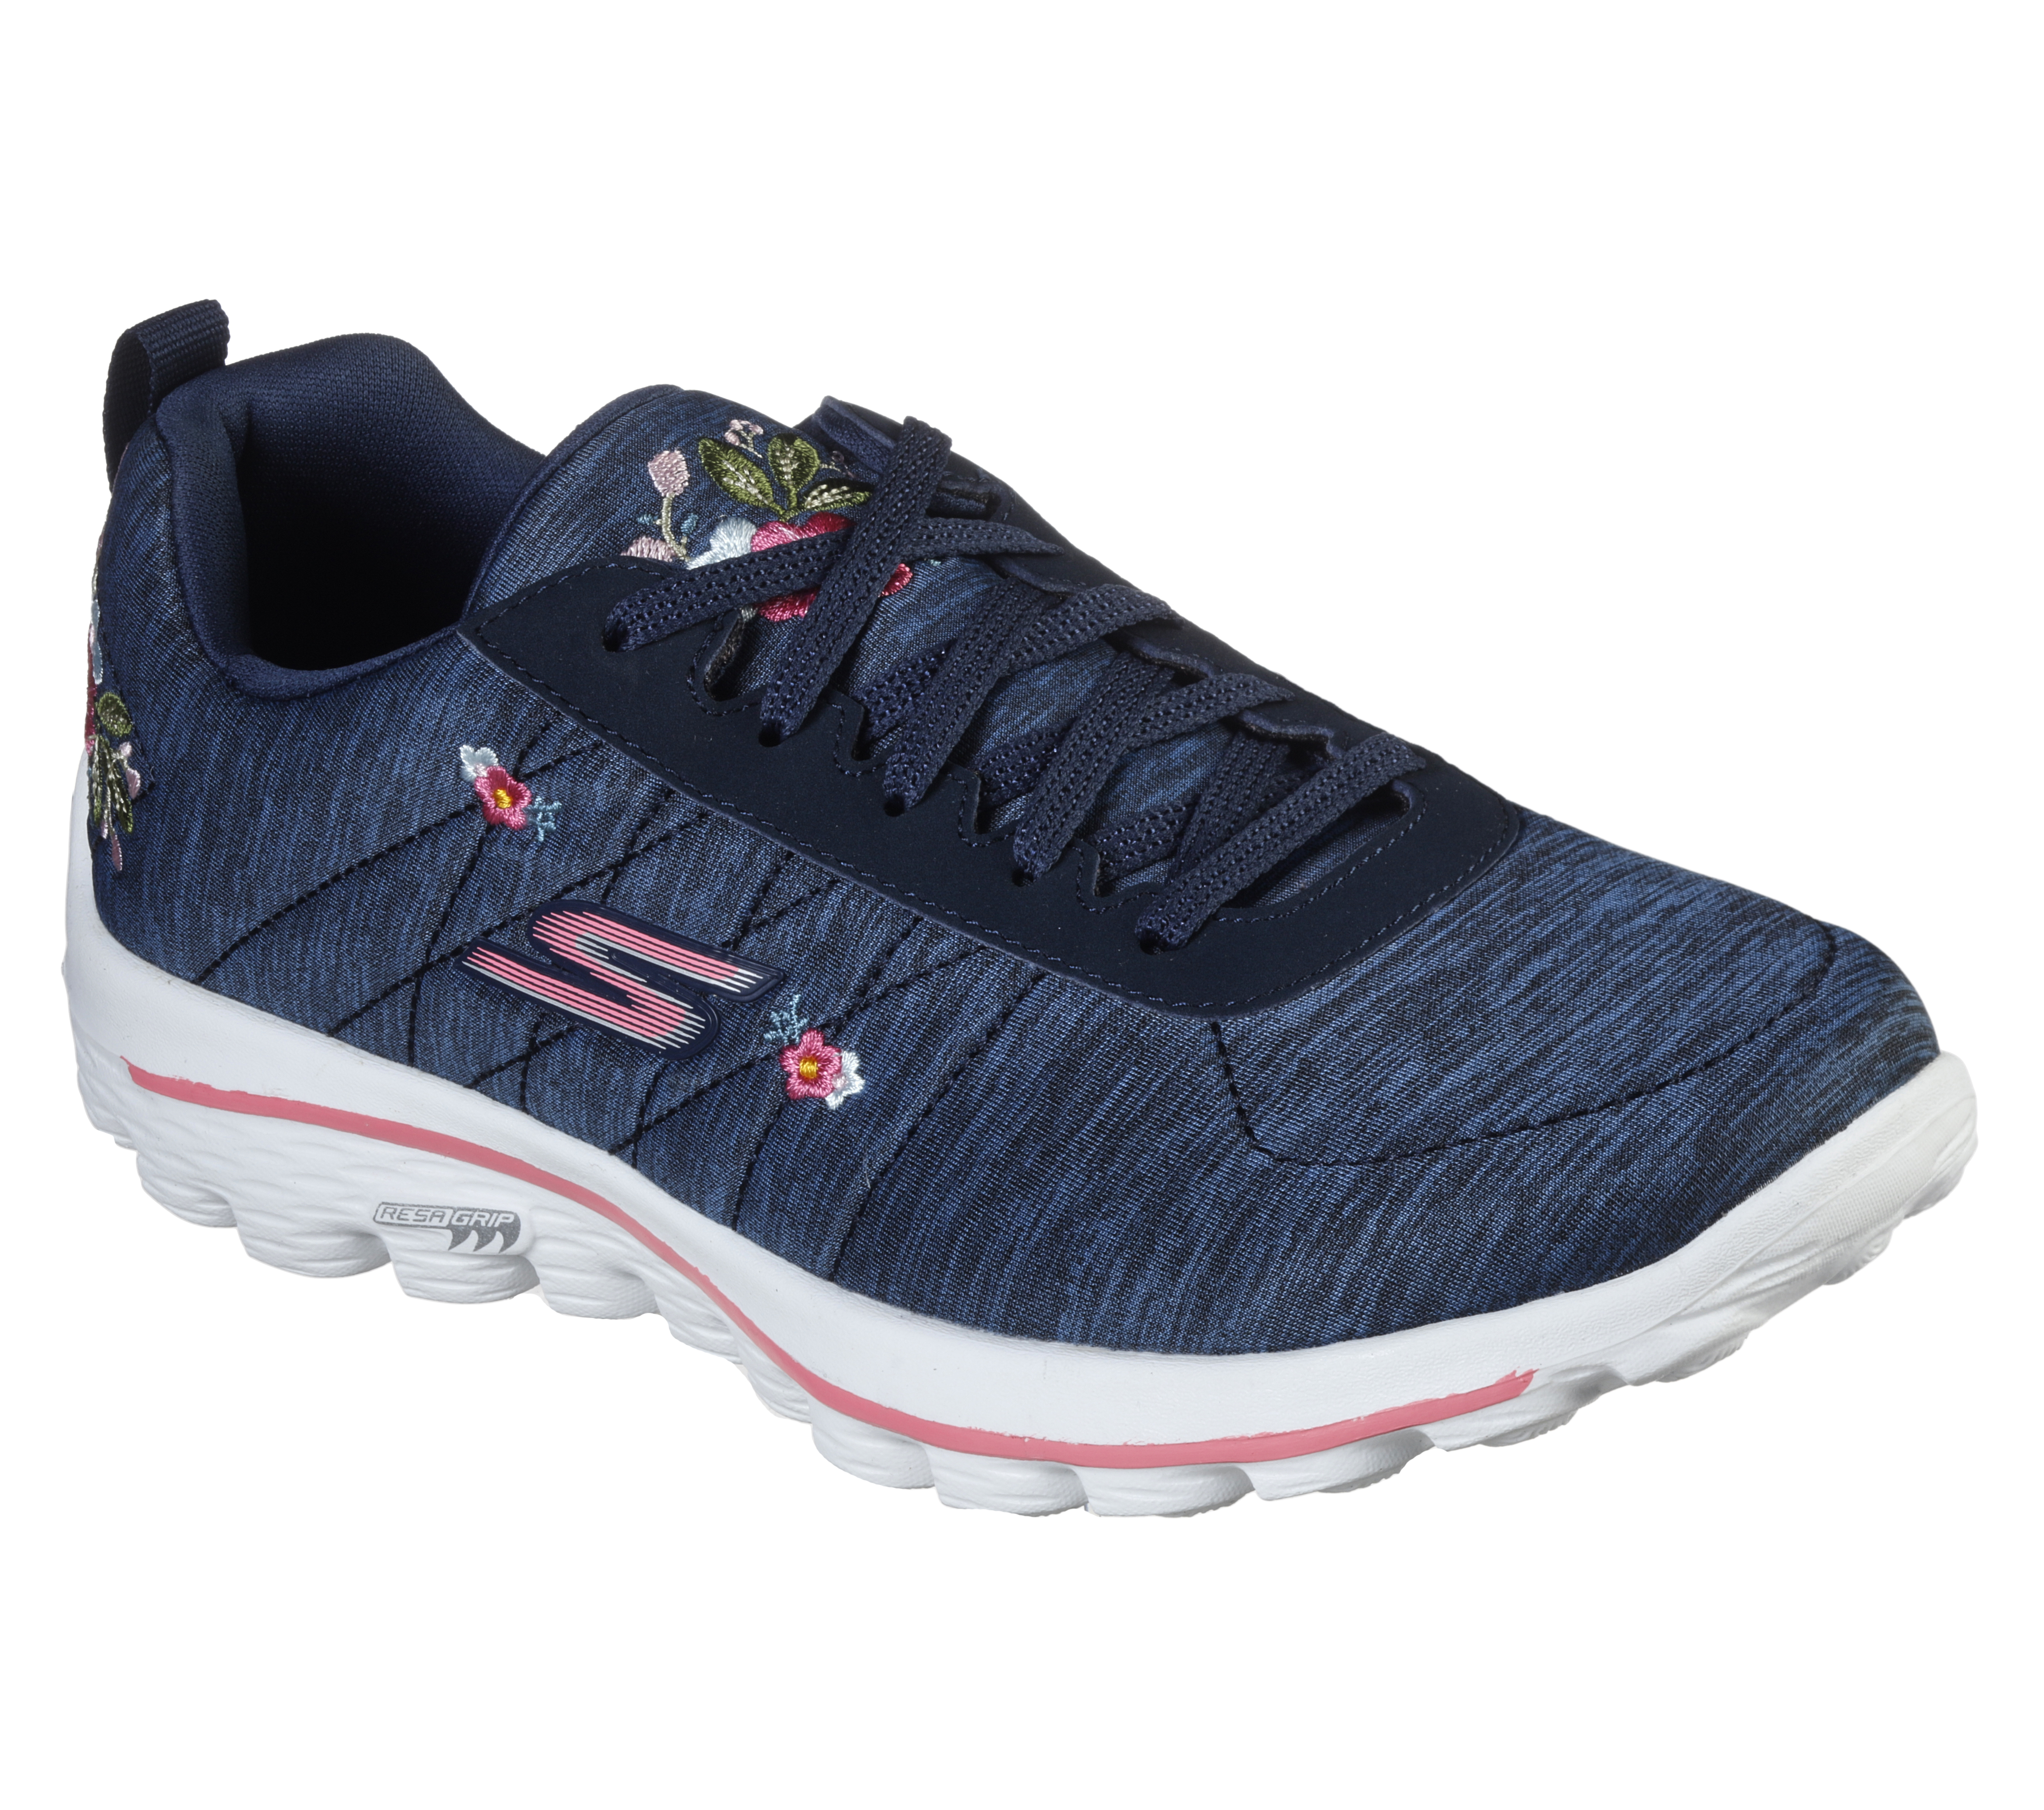 skechers golf shoes portugal